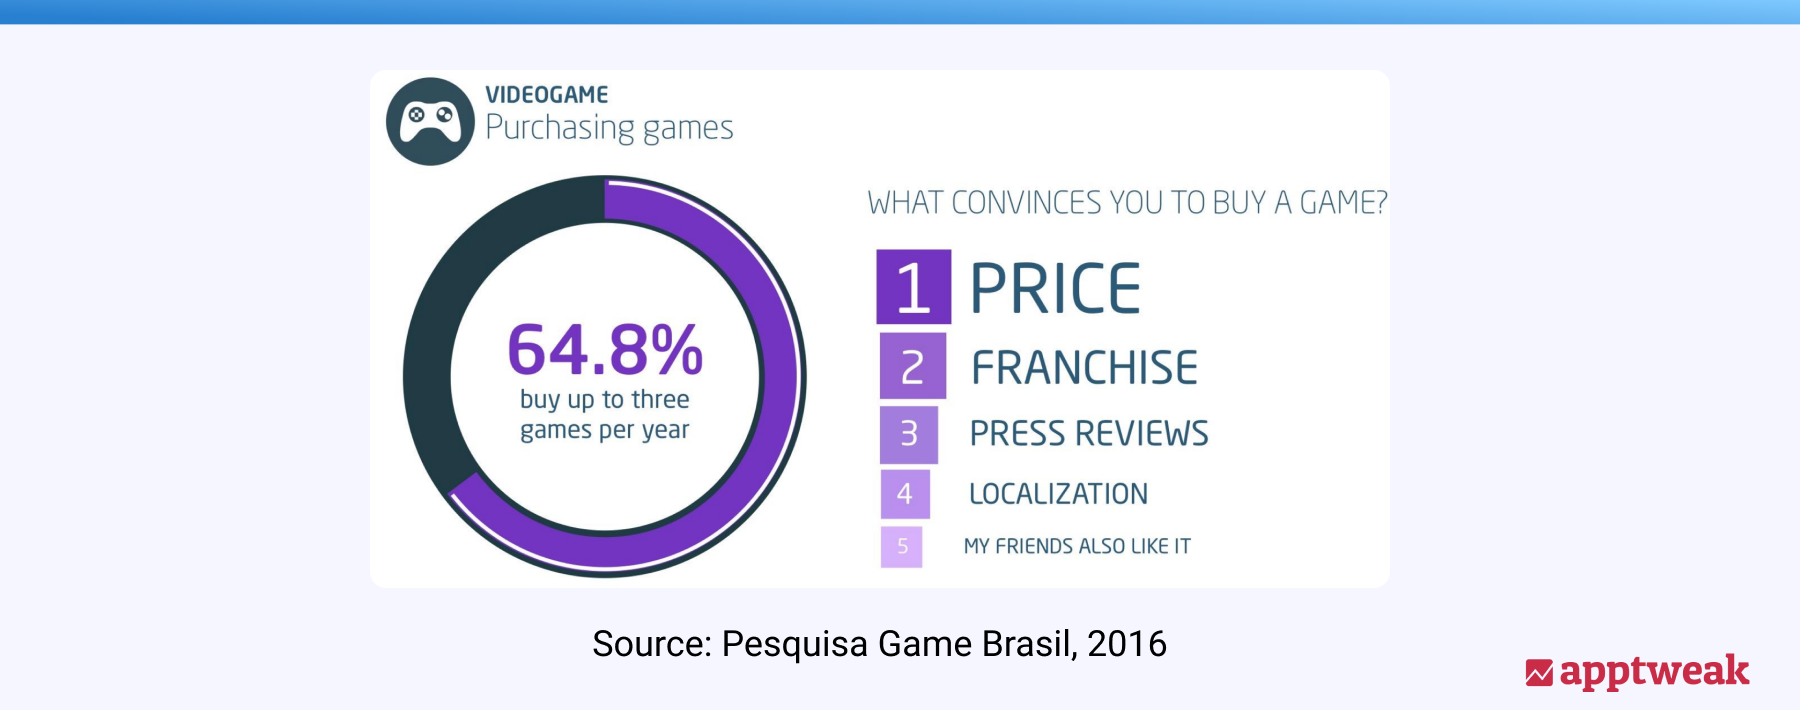 Localization is among the top 5 reasons to download a game in Brazil